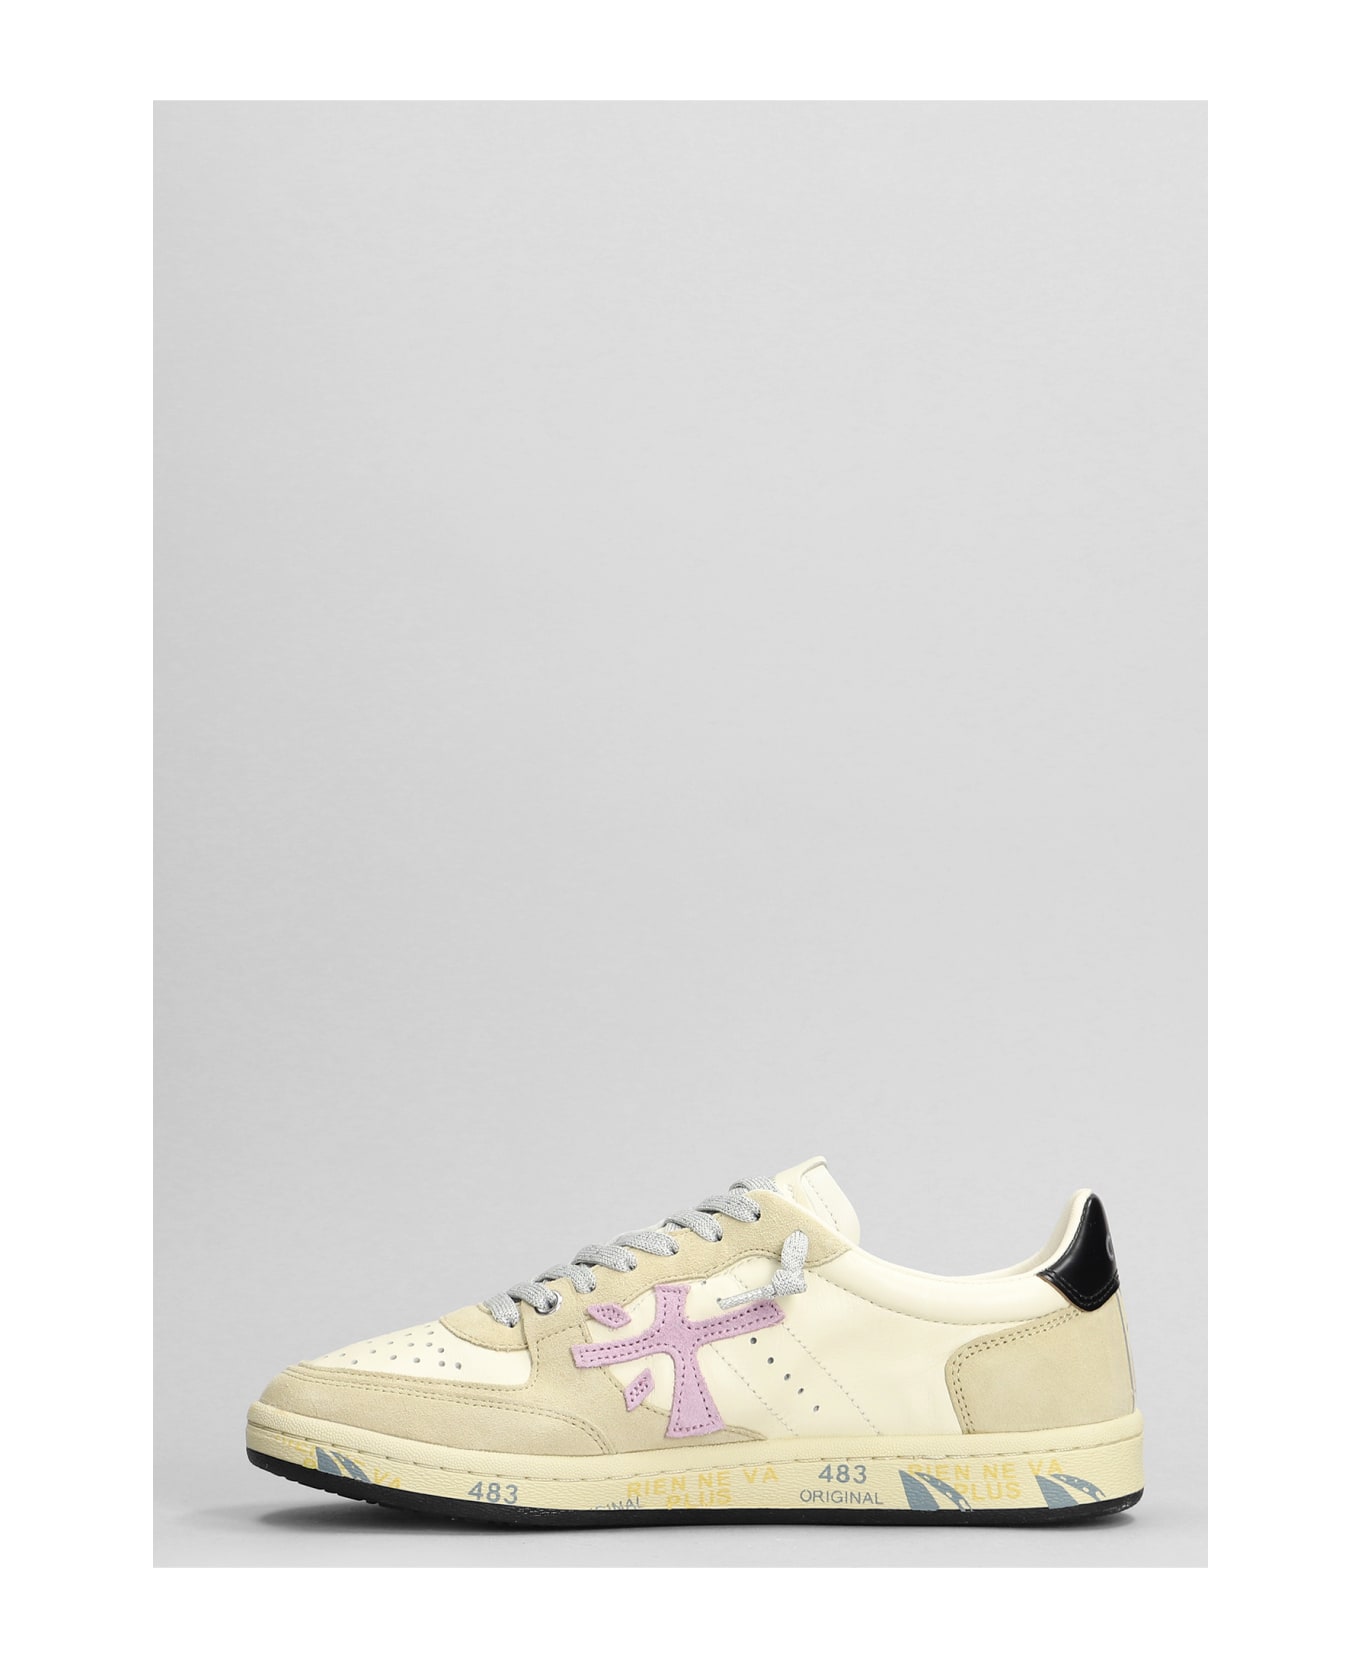 Premiata Bskt Clay Sneakers In Beige Suede And Leather スニーカー